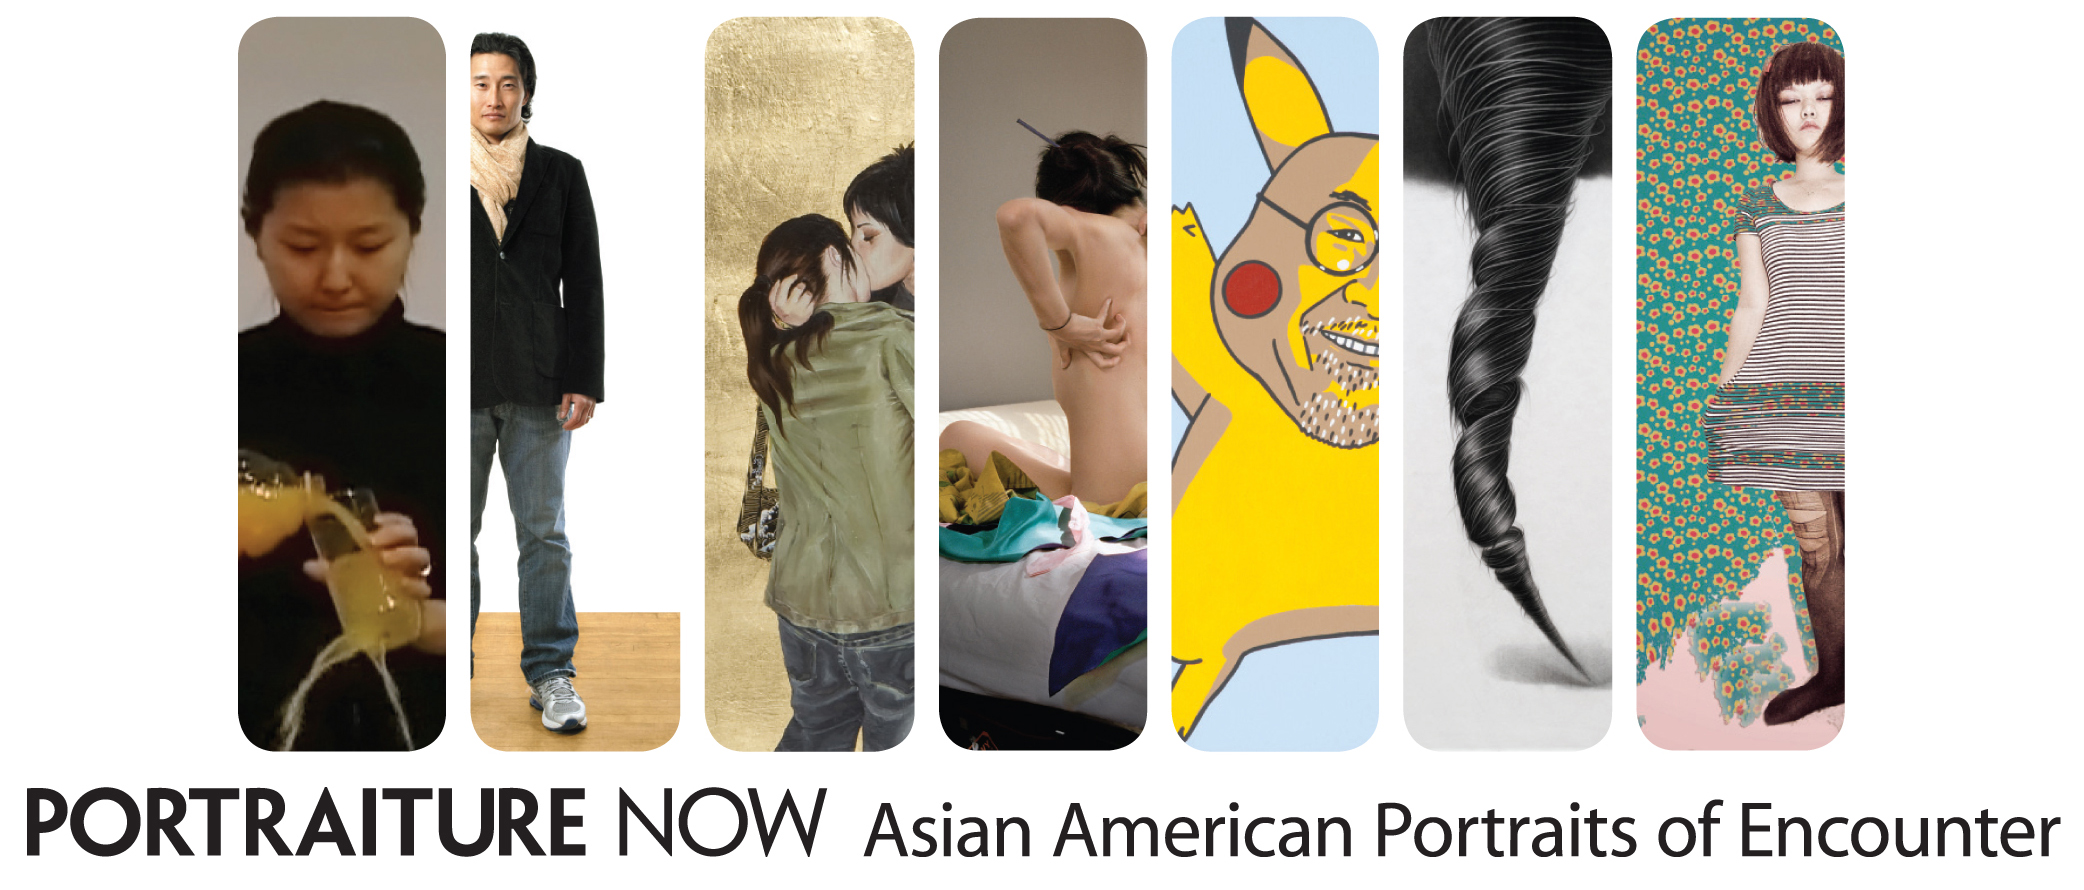 About Portraiture Now Japanese American National Museum